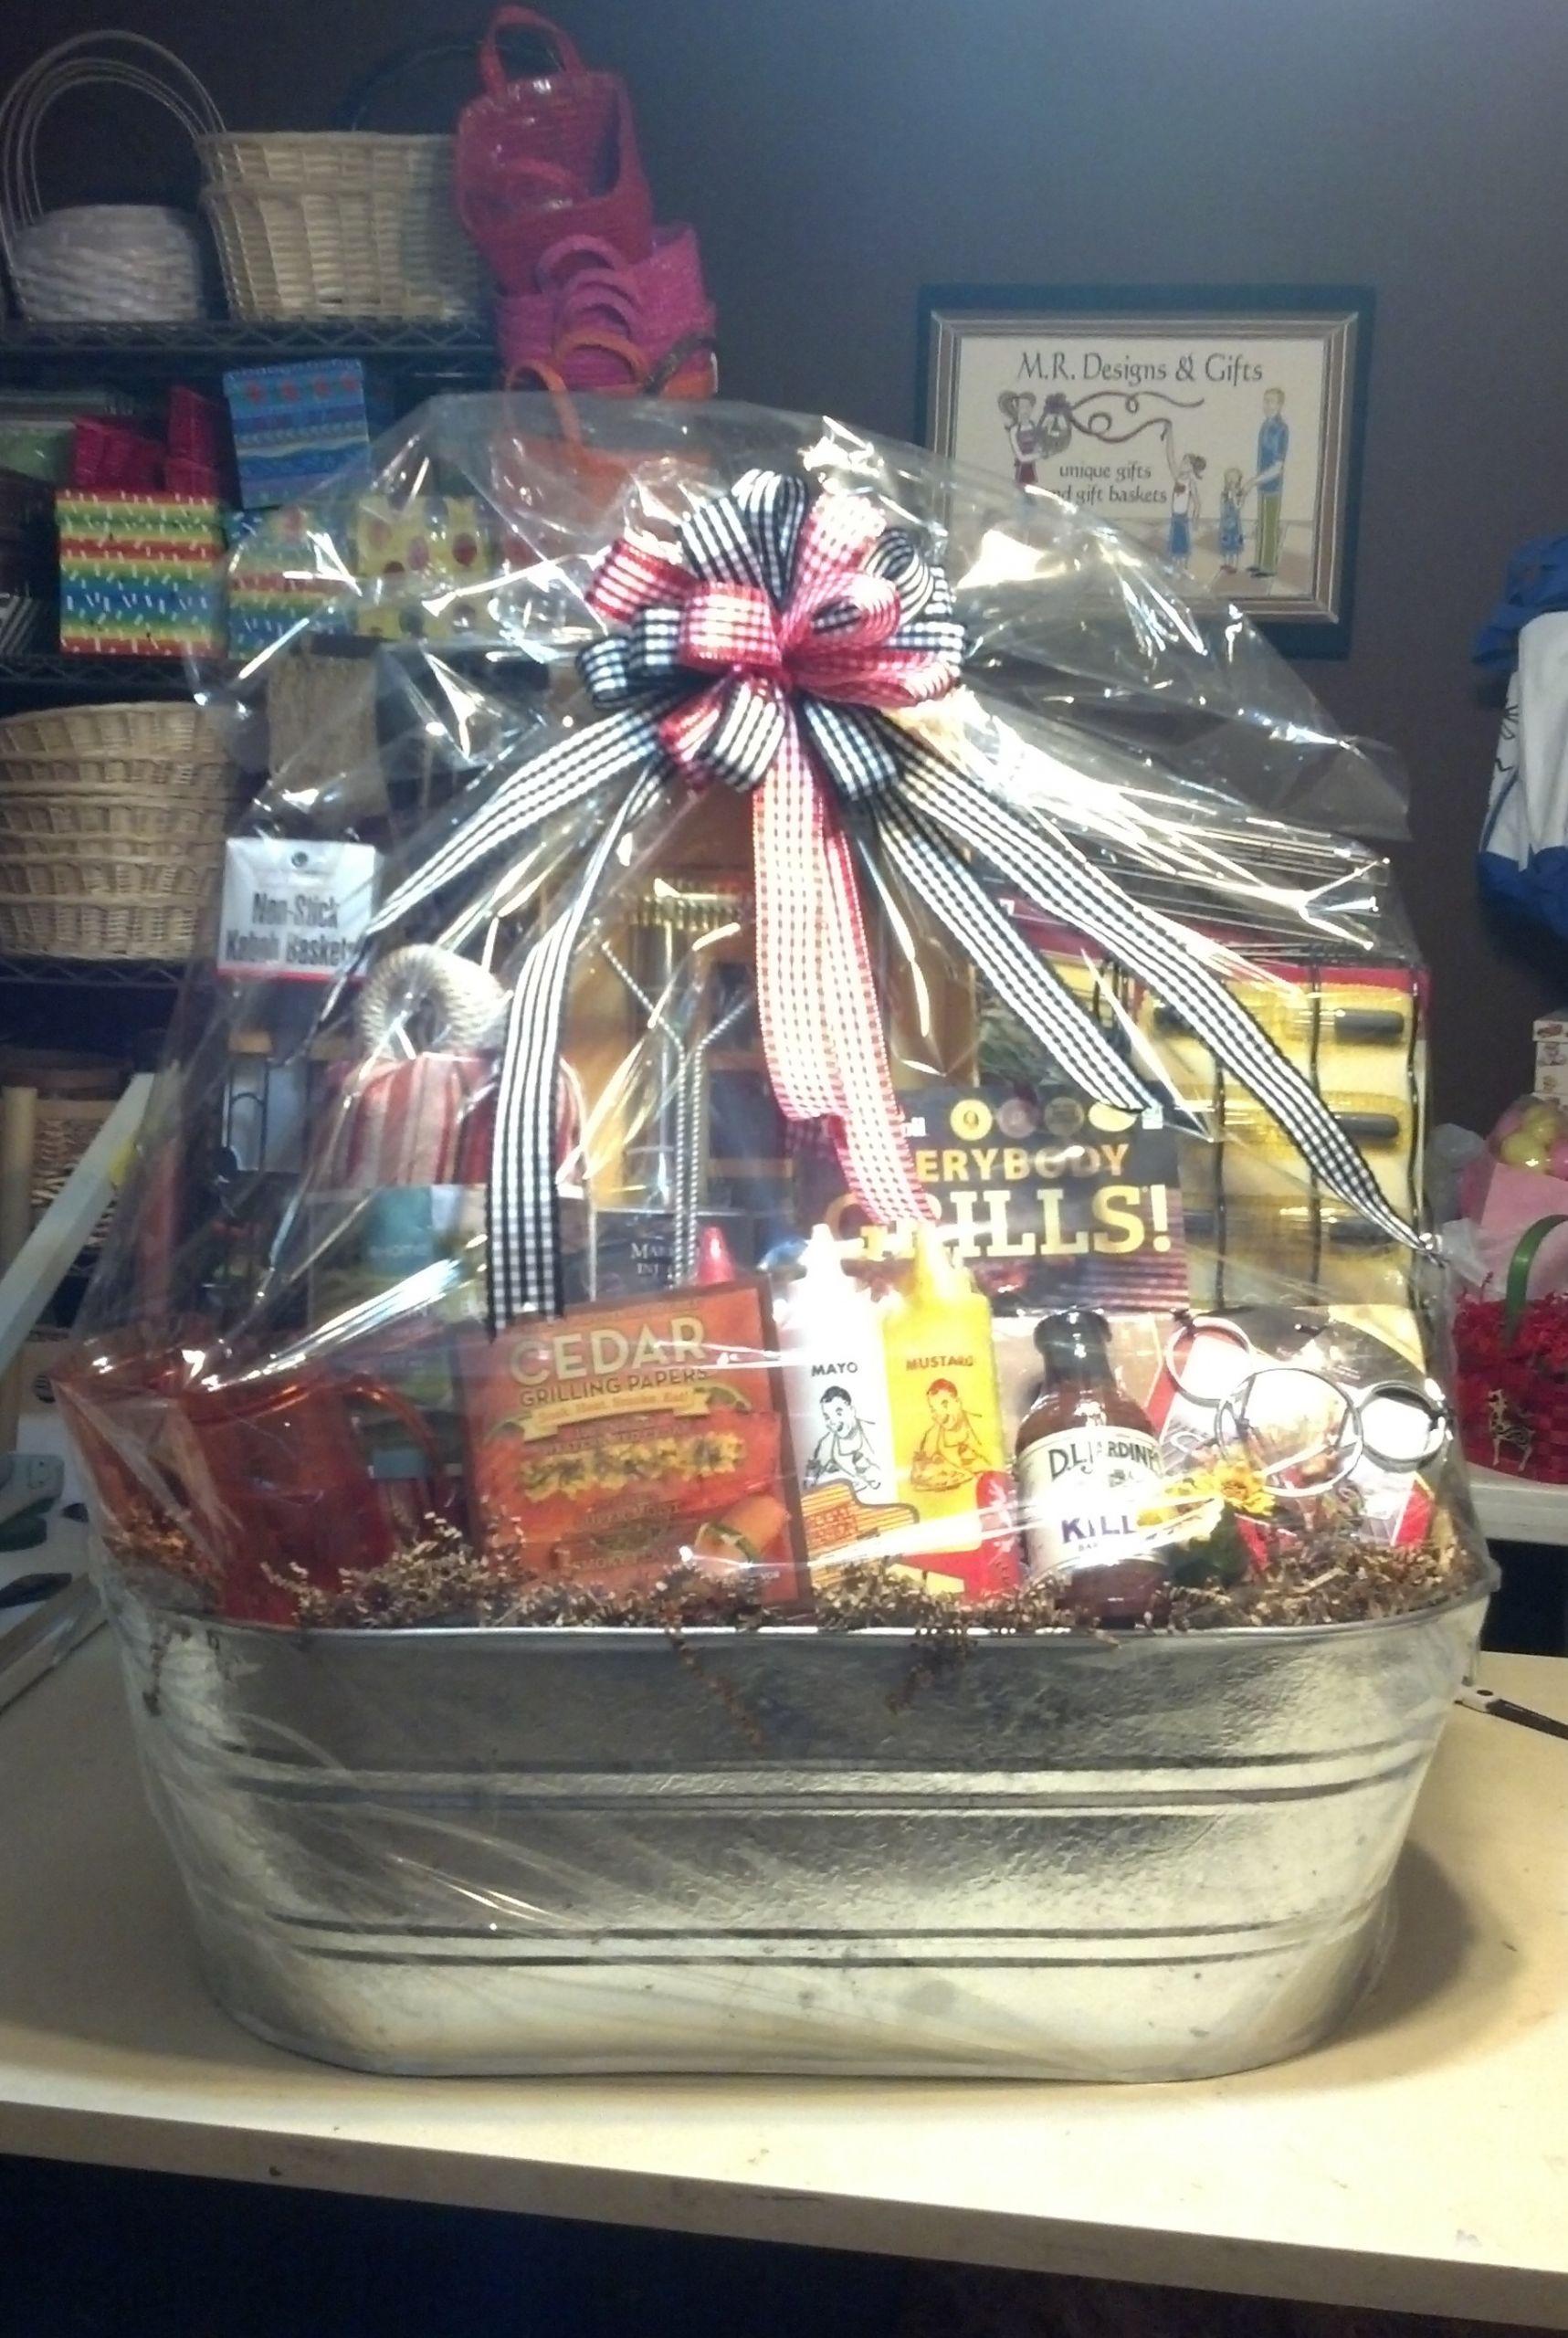 Gift Basket Ideas For Auction
 Special Event and Silent Auction Gift Basket Ideas by M R